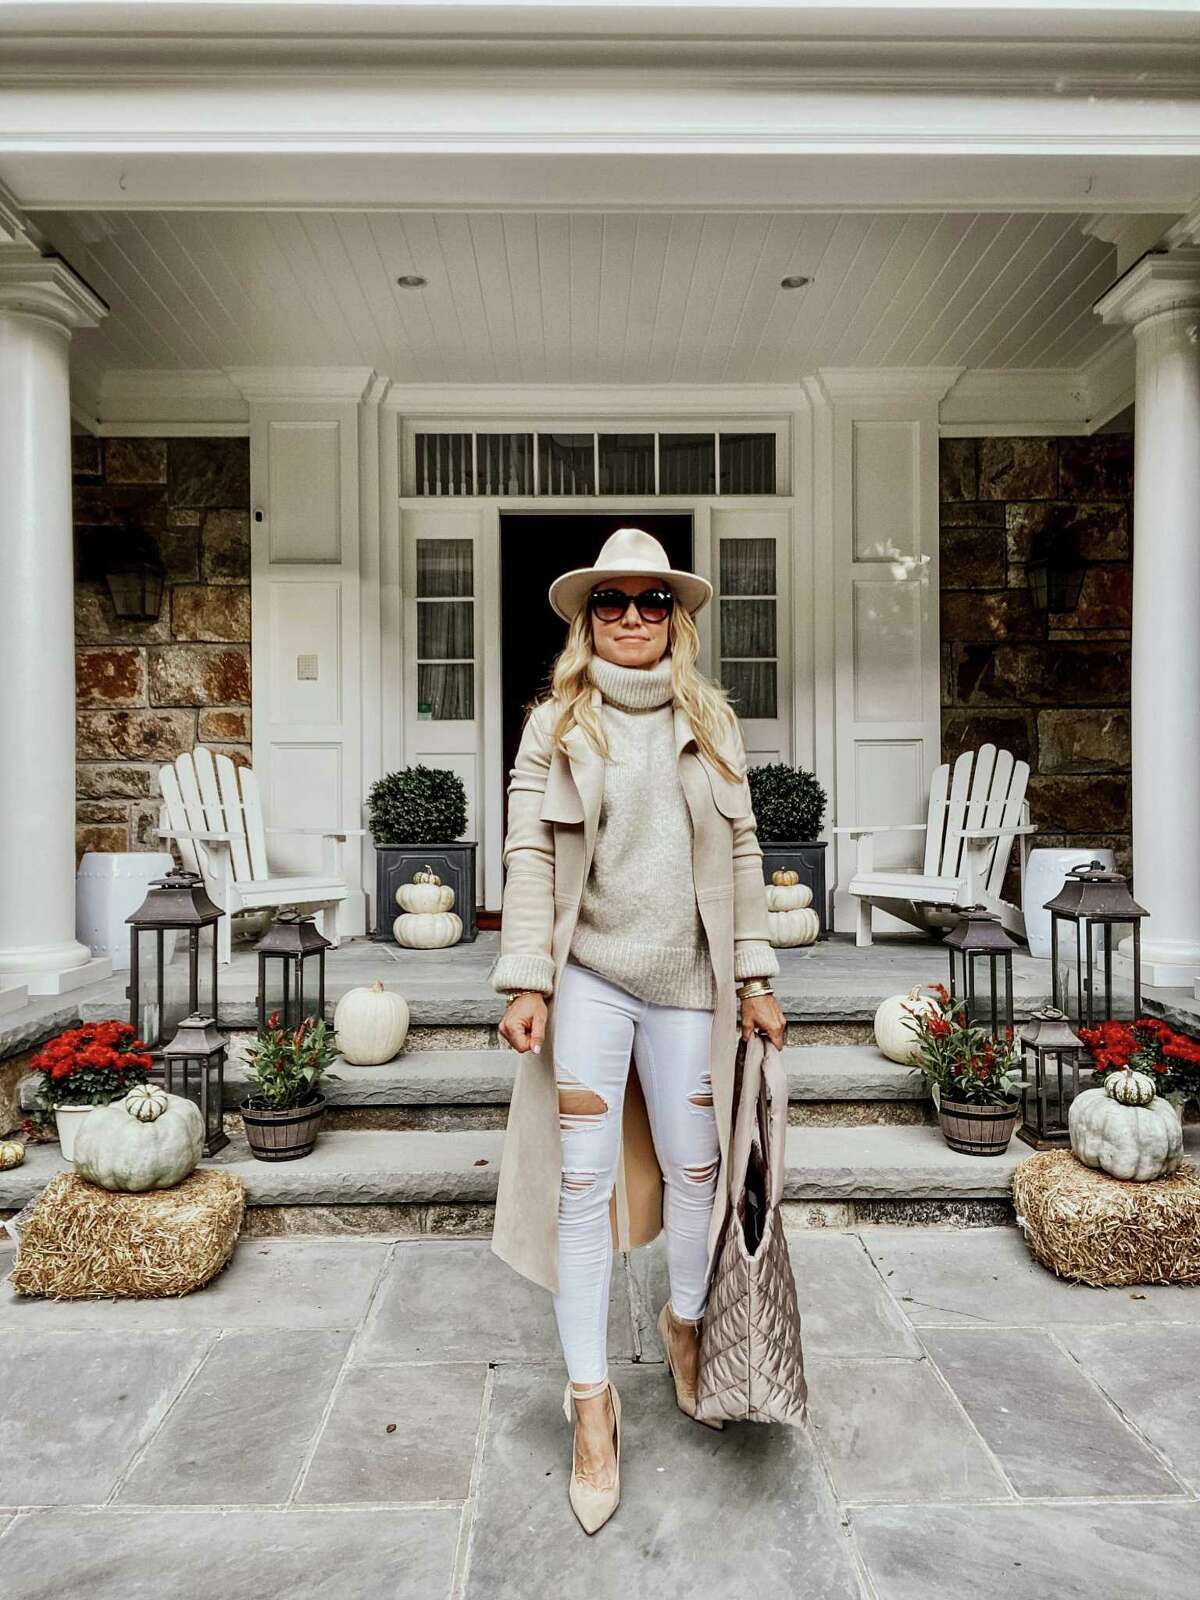 Joanna Young chose a neutral pallet of winter whites and taupes as her style for the Connecticut Post Mall’s Fall Fashion Style Challenge. The mall invited four fashion influencers to participate in the challenge.